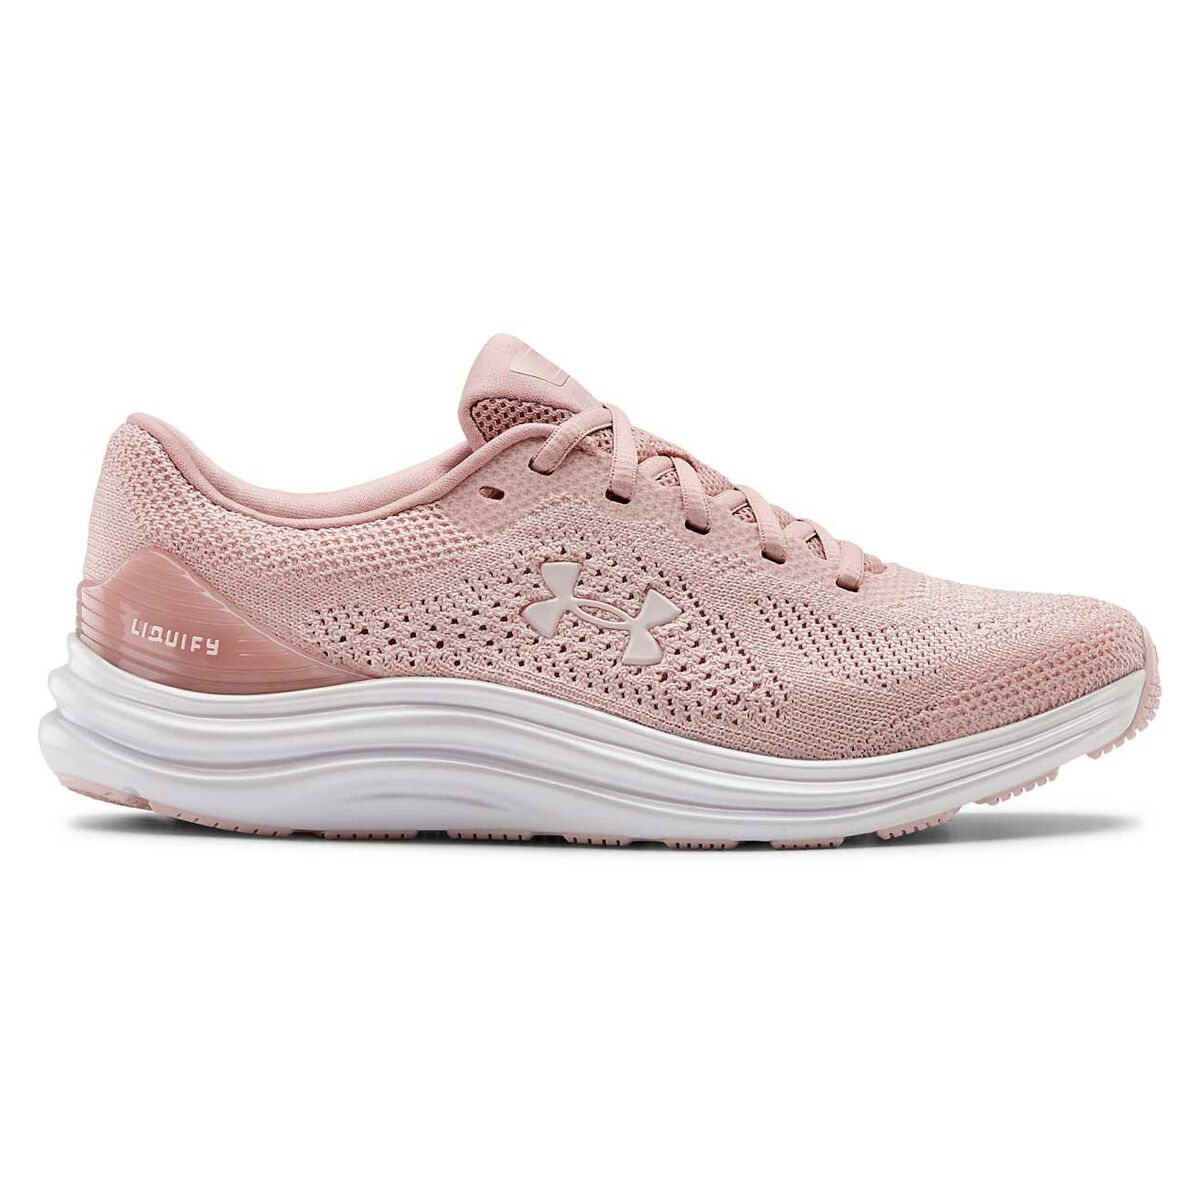 under armour pink tennis shoes